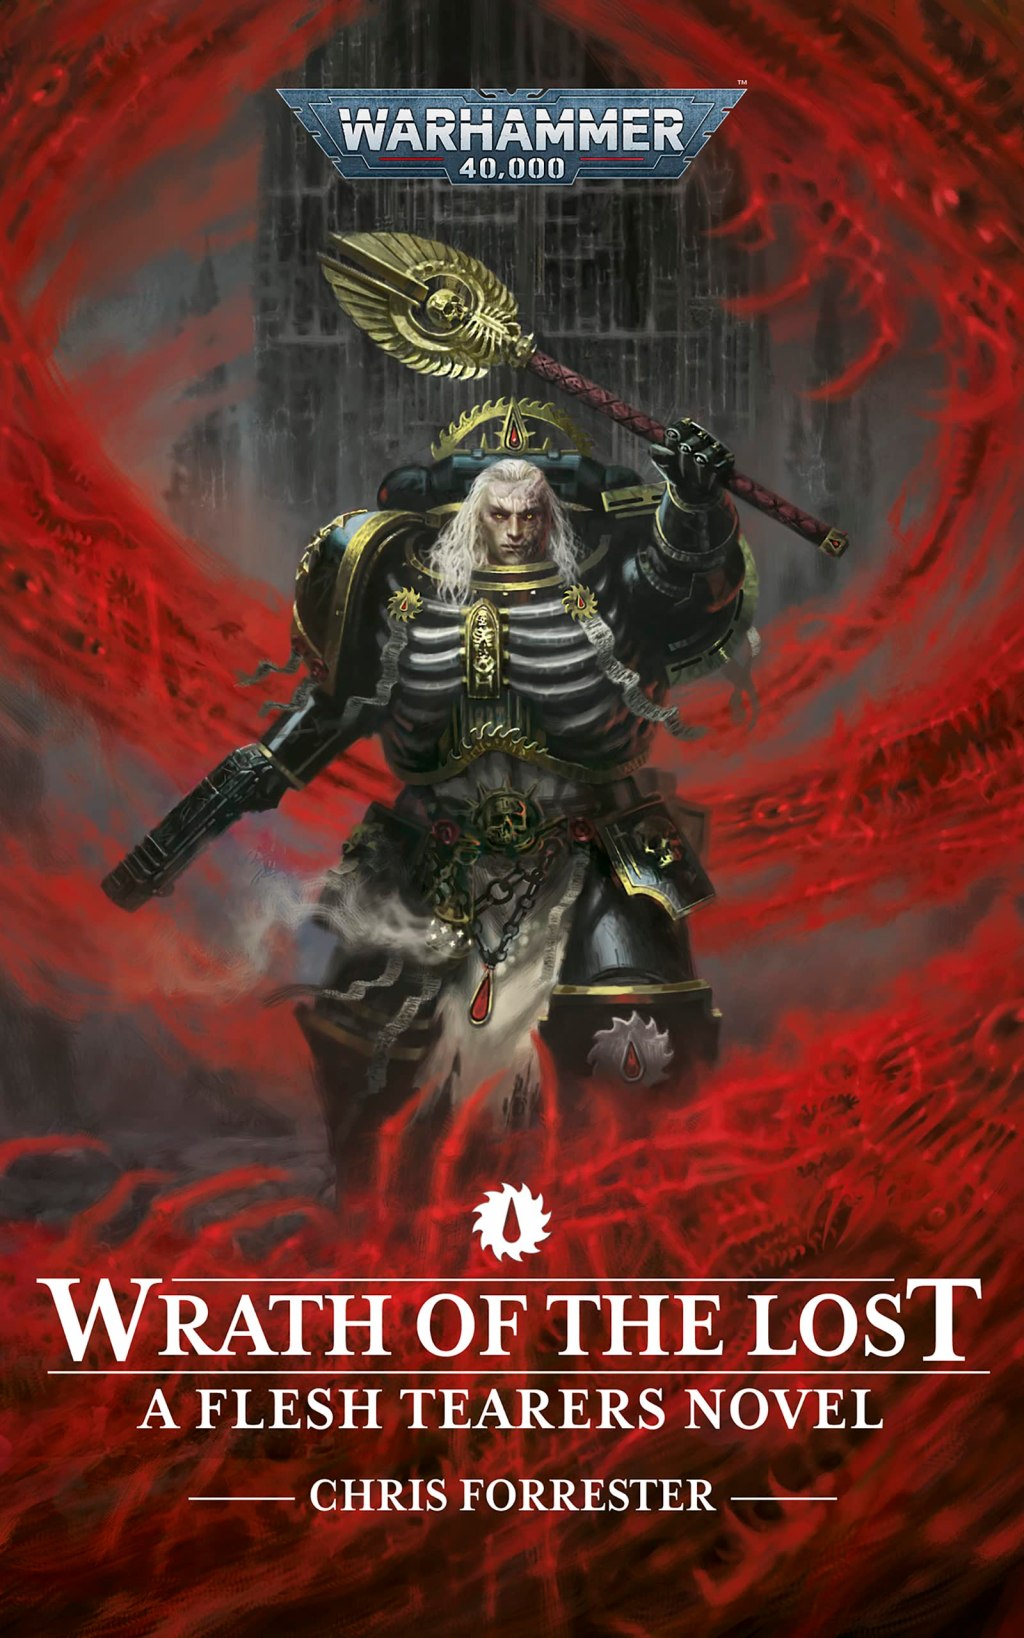 BOOK REVIEW: Wrath of the Lost, by Chris Forrester